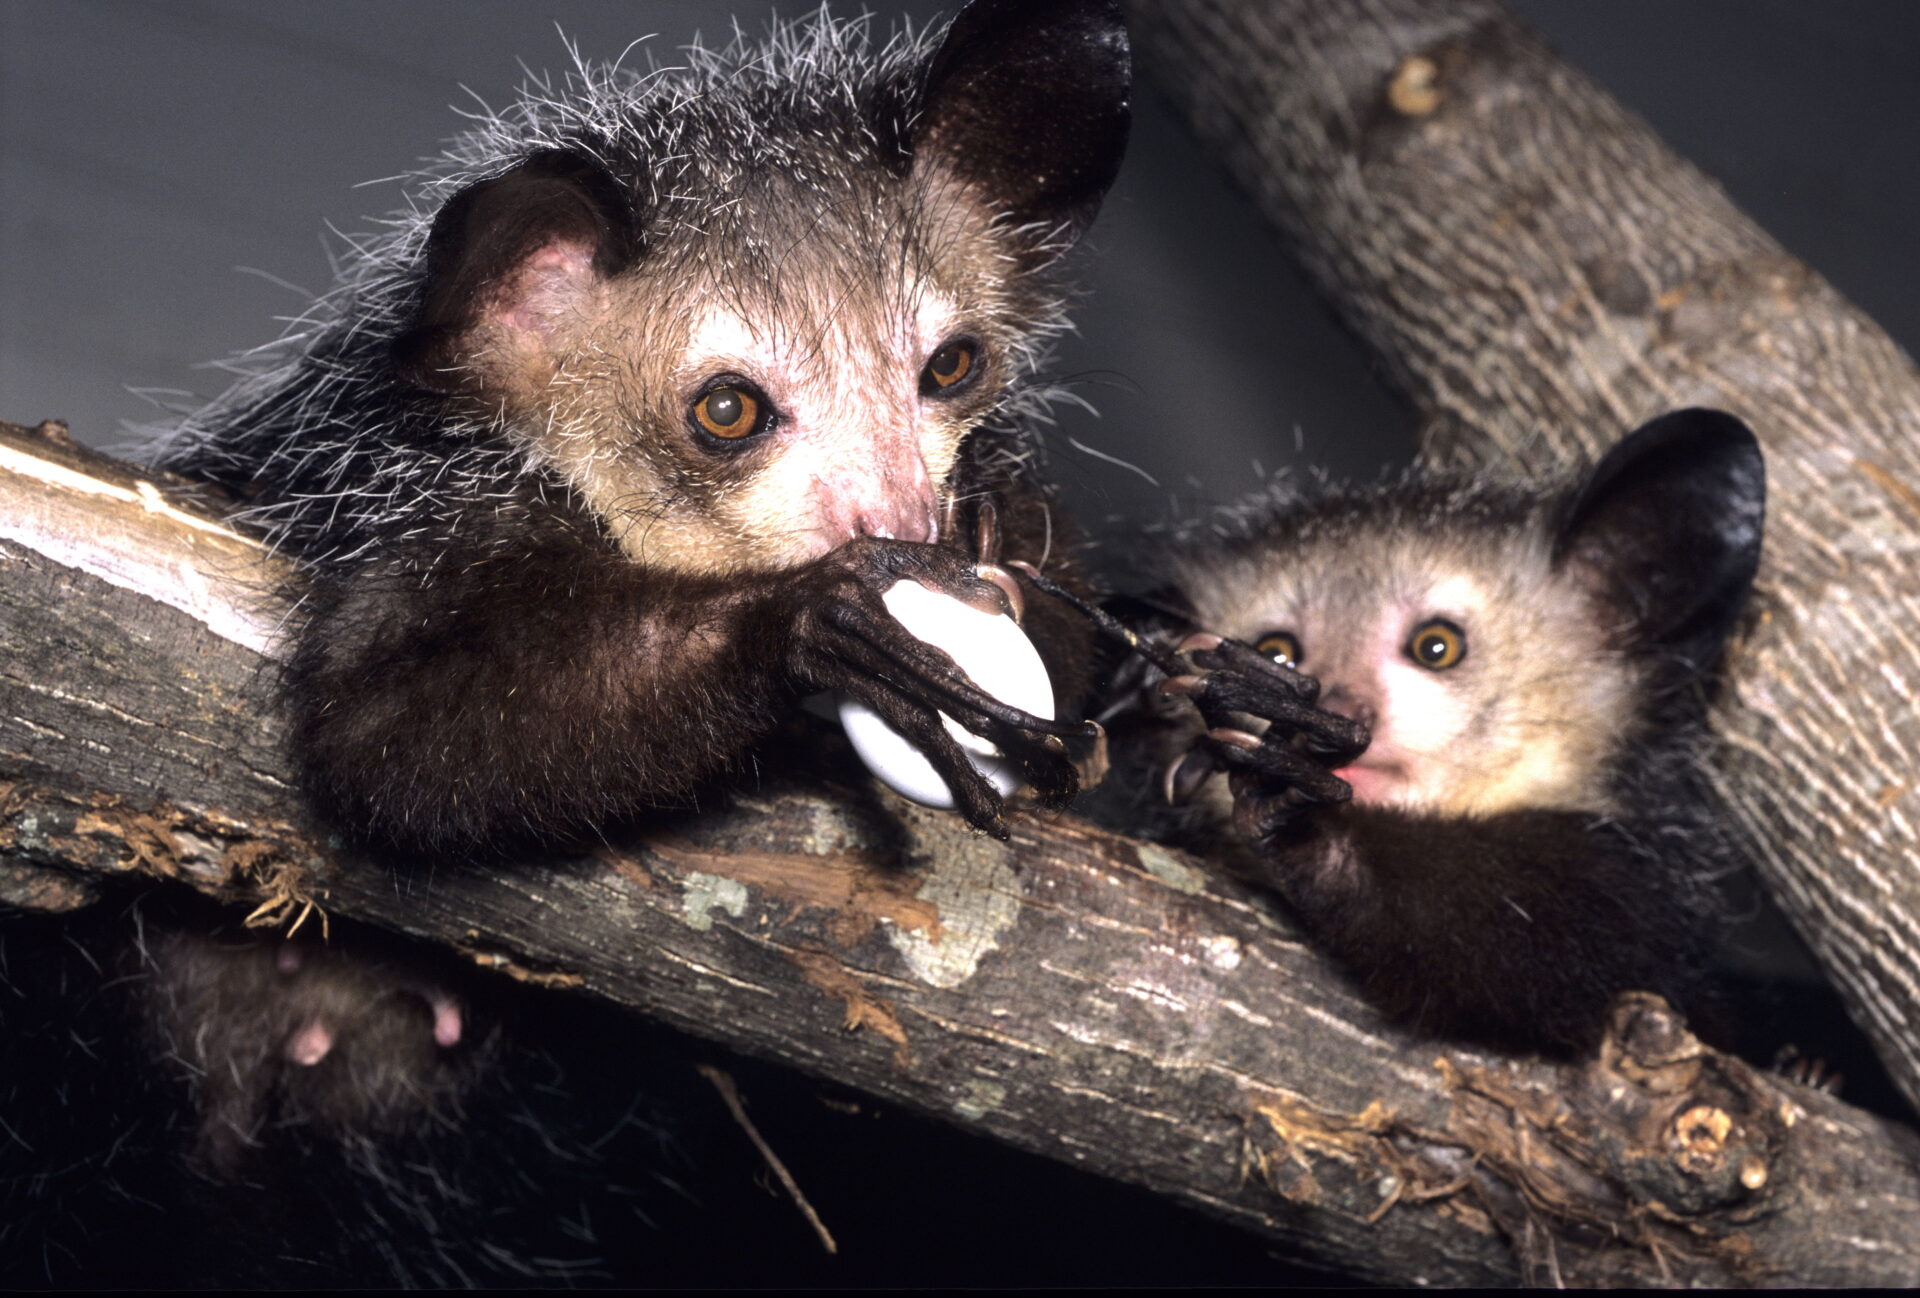 aye-aye mother and infant sharing egg tapping